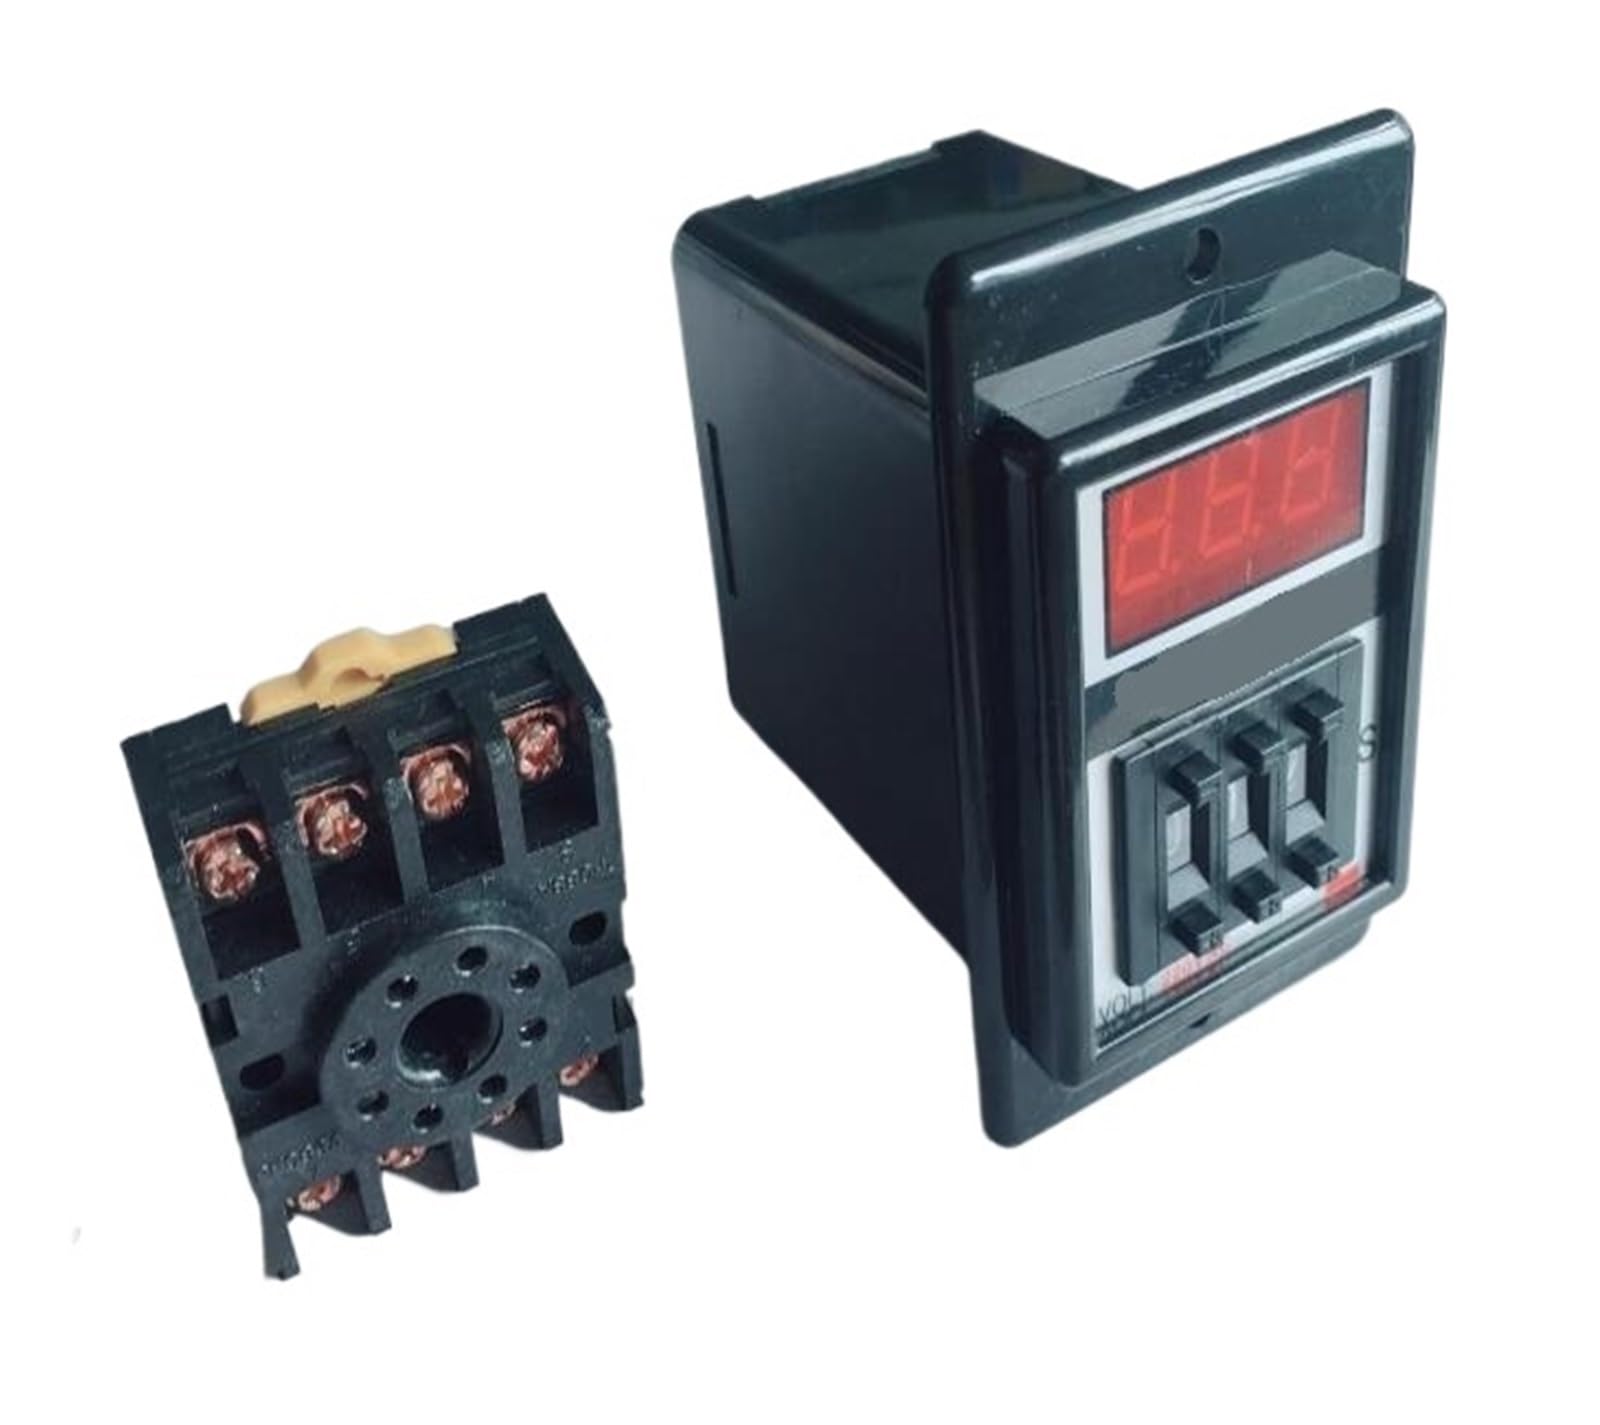 1-99S 1-9.9S 1-99M digits programmable timer delay relay ASY-2D Delay Timer Time Relay 8PIN with base LABDIP(ASY-2D 99S,AC110V) von LABDIP